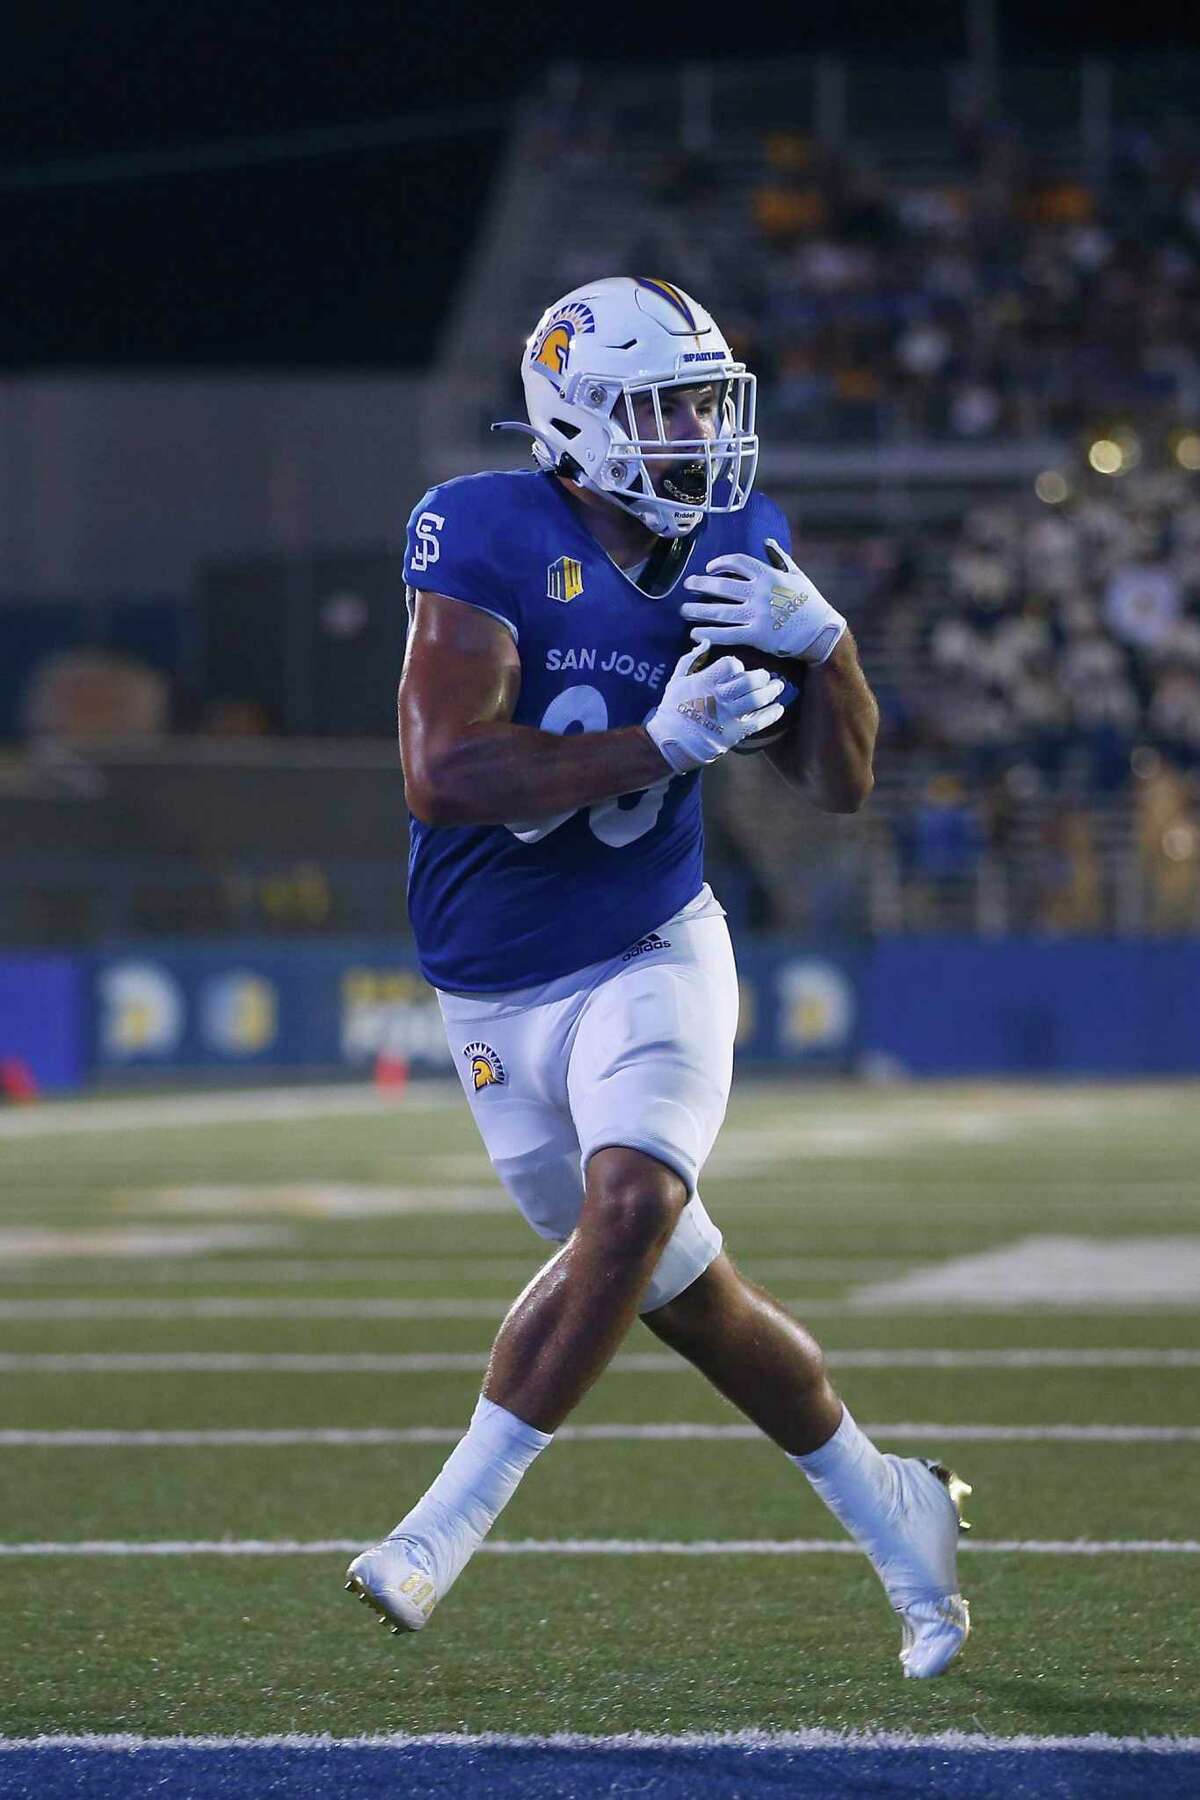 San Jose State Spartans tight end Sam Olson (88)catches a touchdown in the second quarter against the Portland State Vikings during an NCAA football game on Thursday, Sept. 1, 2022 in San Jose, Calif. (AP Photo/Lachlan Cunningham)